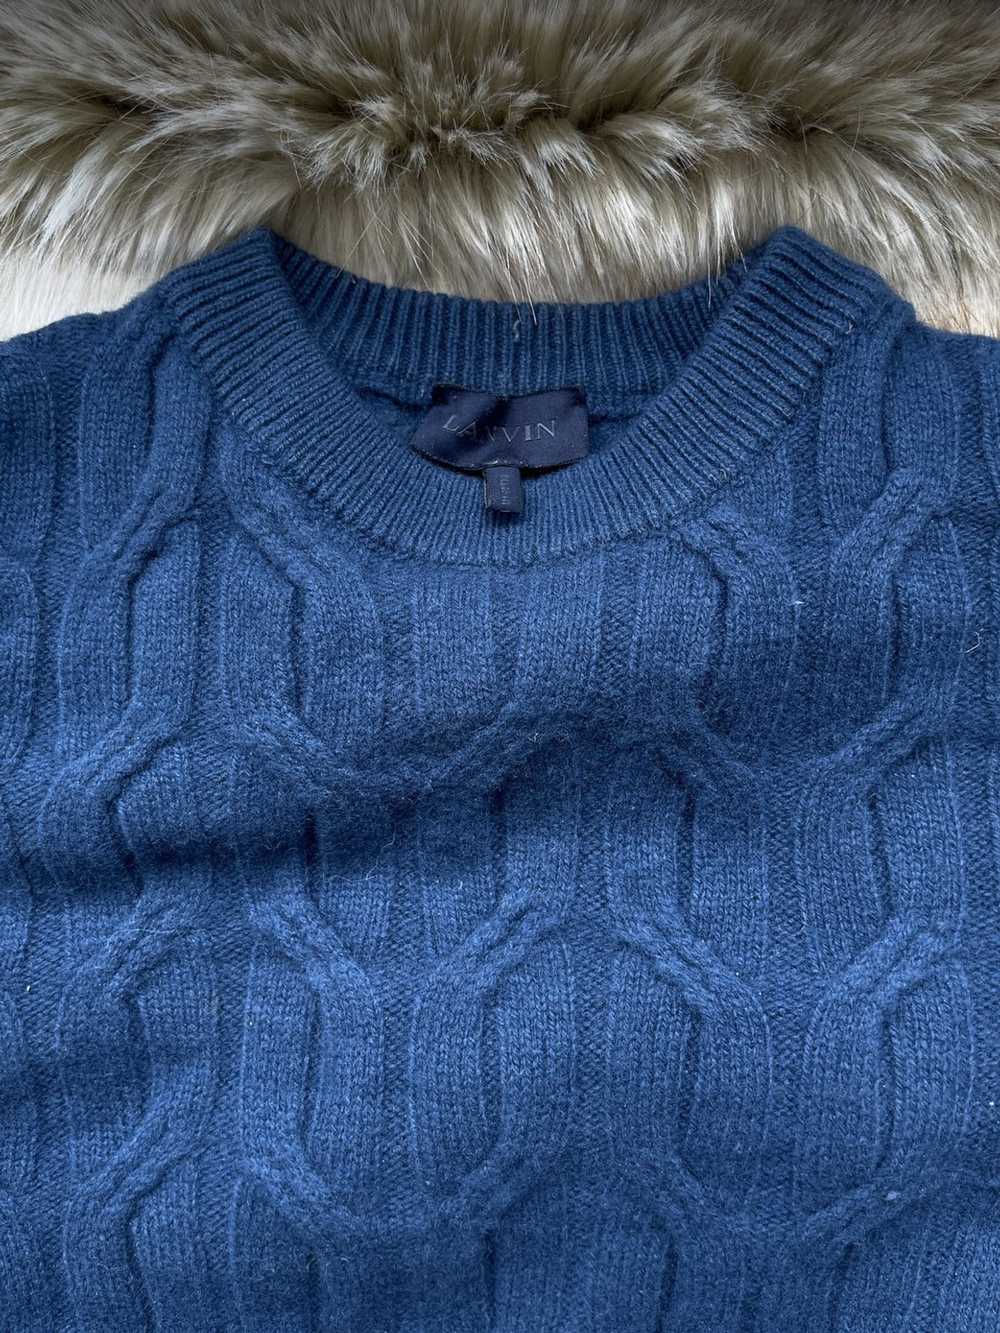 Lanvin Cable knit sweater - image 2